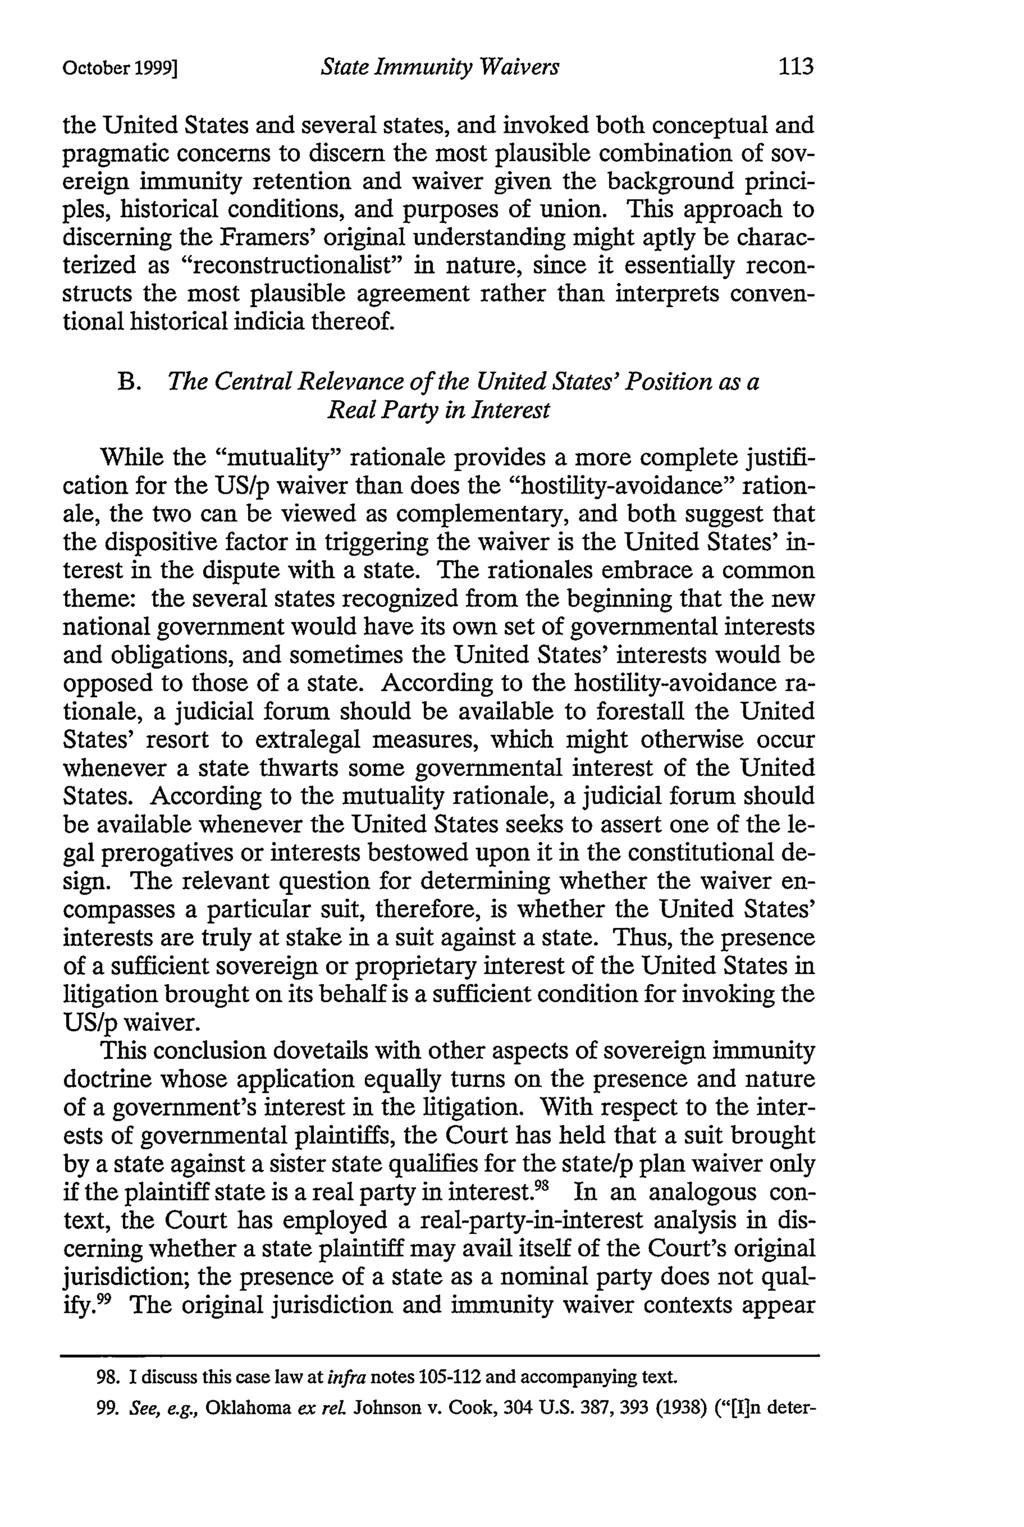 October 1999] State Immunity Waivers the United States and several states, and invoked both conceptual and pragmatic concerns to discern the most plausible combination of sovereign immunity retention